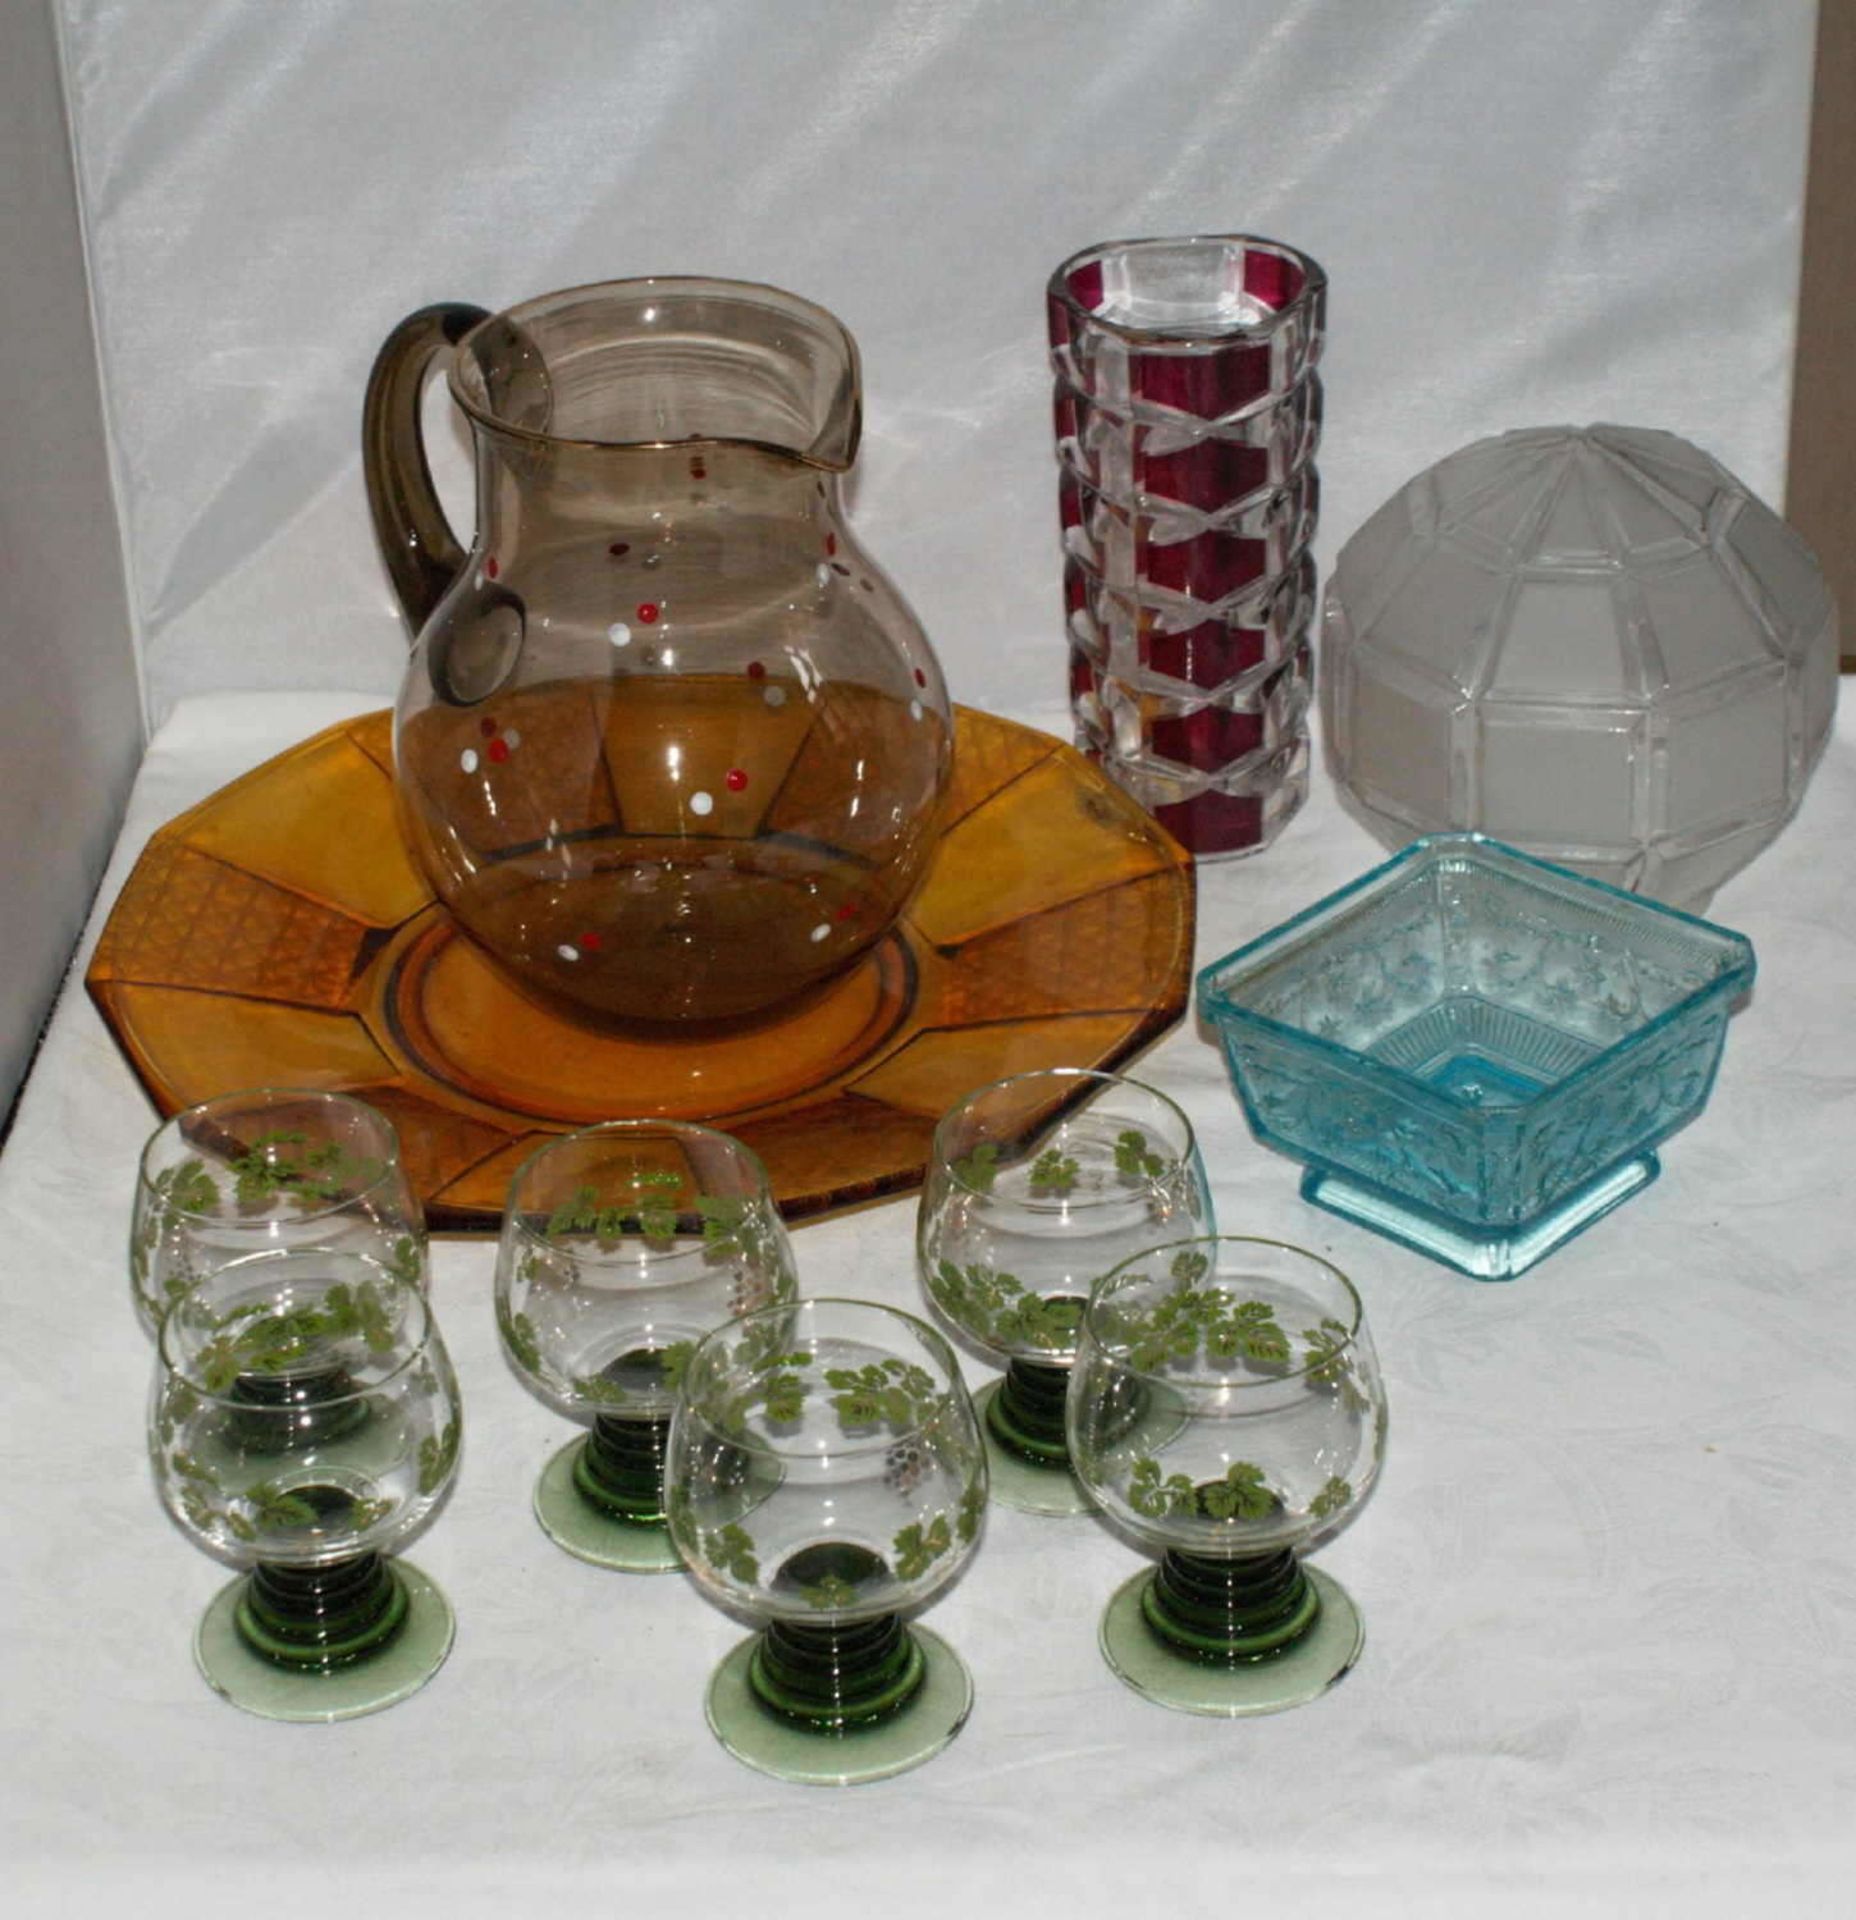 1 Glaskonvolut from old household, consisting of 6 small wine press, 1x glass jug, 1 vase, etc.